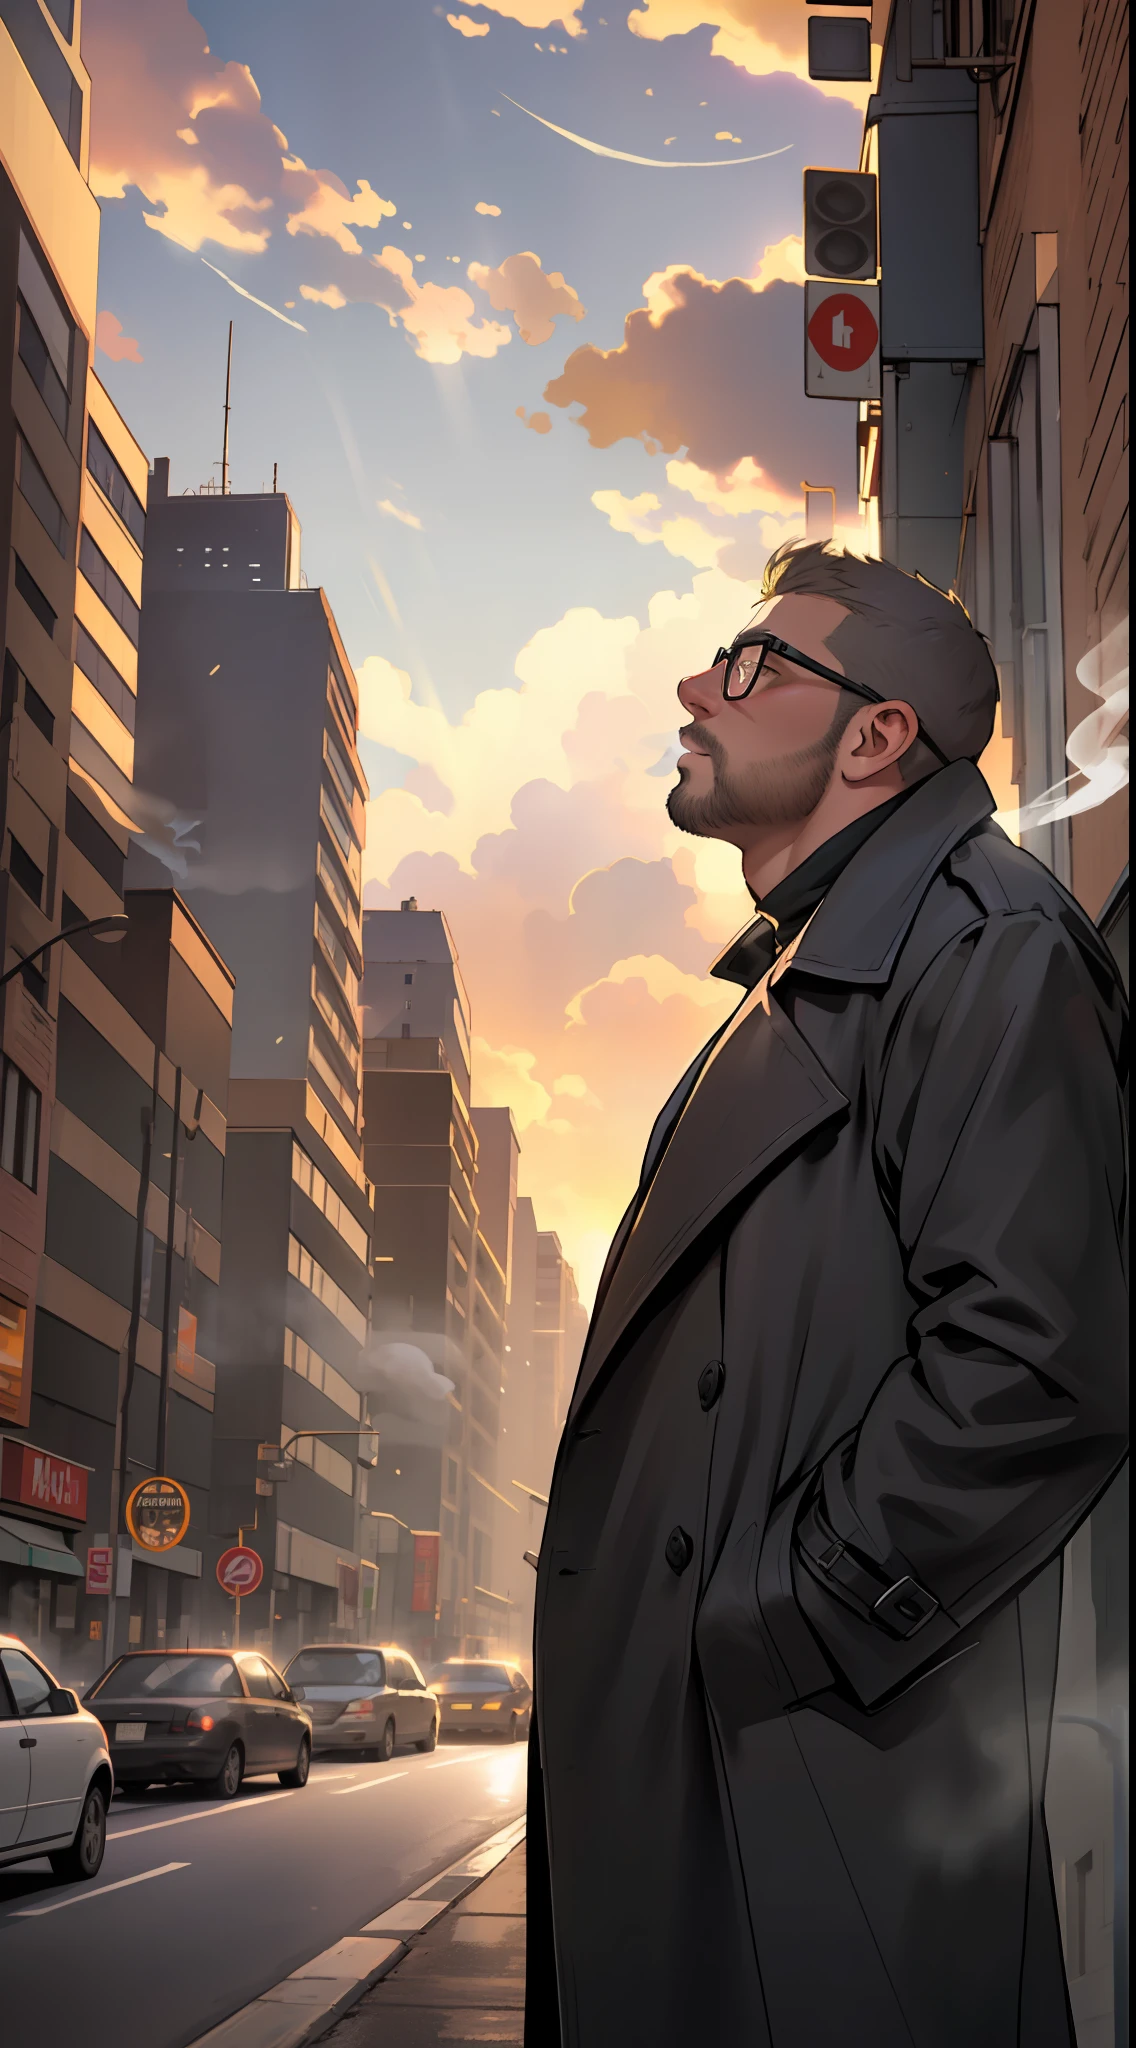 masterpiece, best quality, highres, upper body shot, ((wide angle)), zoom out, middle-aged man, macho, daddy, beefy, burly, hairy, manly, really tall, wearing a smooth silk black trench coat, grey shirt, wearing glasses, standing in the middle of a New York's crossroad, standing in the center of the shot, smoking a cigarette, blowing smoke out from the mouth, looking up to the sky, hands in the pockets, (sunset), afternoon, golden hour, golden sky color, dark buildings in the background, incredible composition, HDR, volumetric lighting, shadows, beam of sunlight shinning on the streets, seen from the side, aesthetic